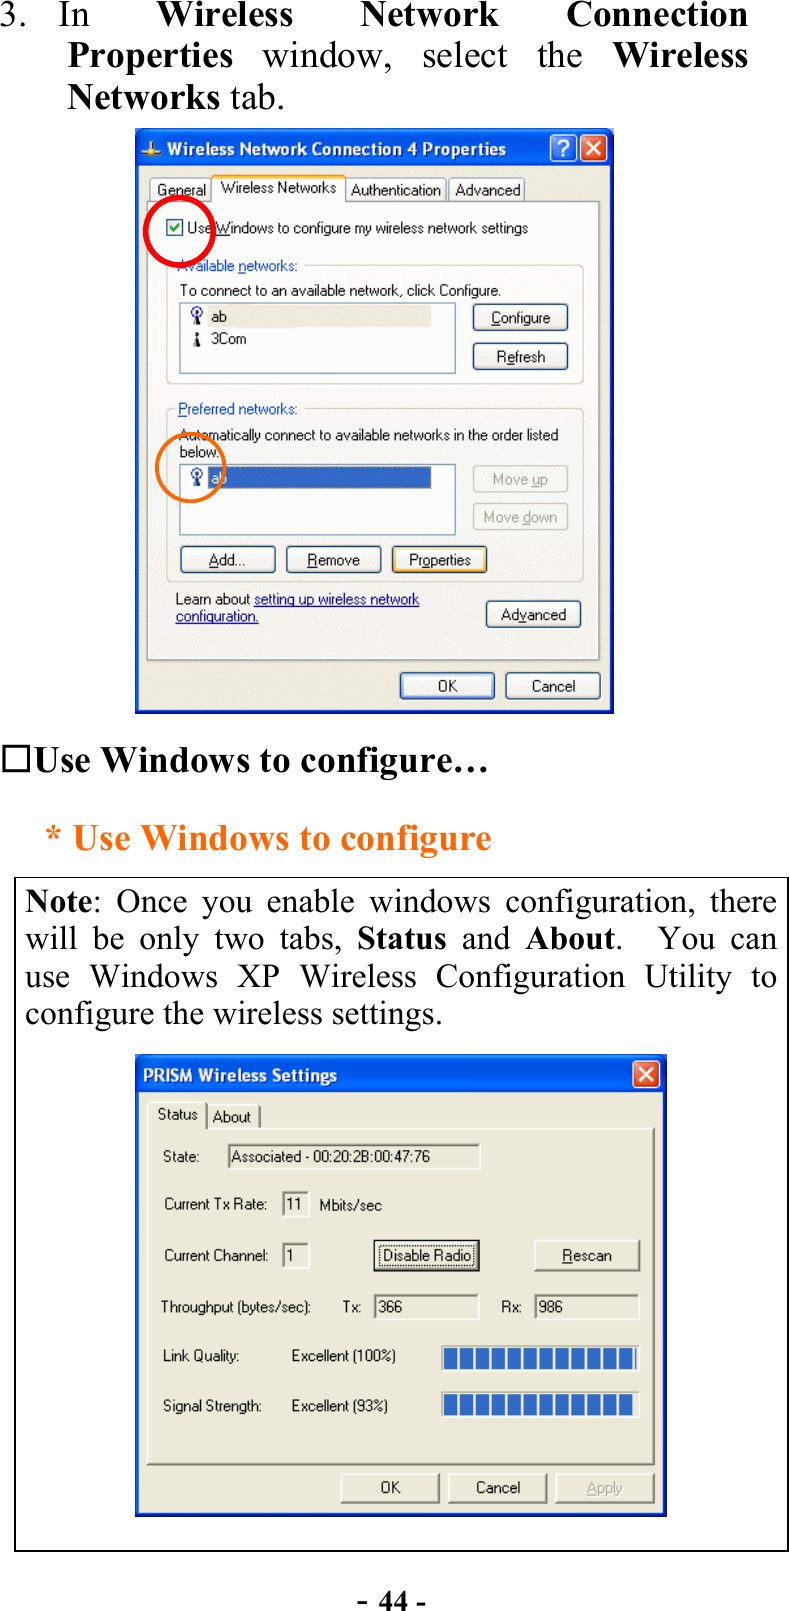  - 44 - 3. In  Wireless Network Connection Properties window, select the Wireless Networks tab.      Use Windows to configure… * Use Windows to configure Note: Once you enable windows configuration, there will be only two tabs, Status and About.  You can use Windows XP Wireless Configuration Utility to configure the wireless settings.  